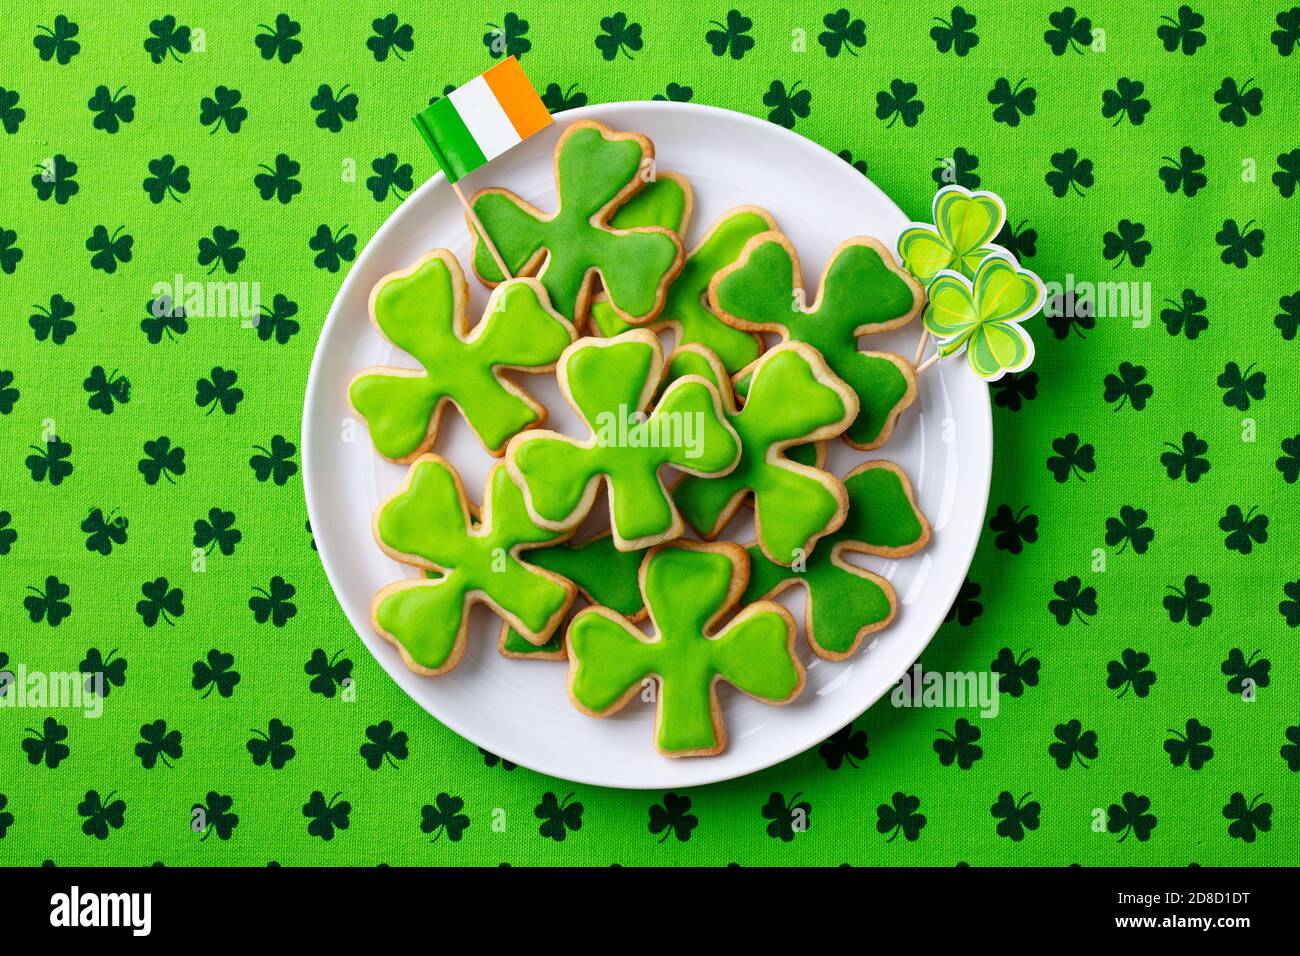 Shamrock cookies with Irish flag, St. Patrick's Day dessert. Green textile background. Top view. Stock Photo